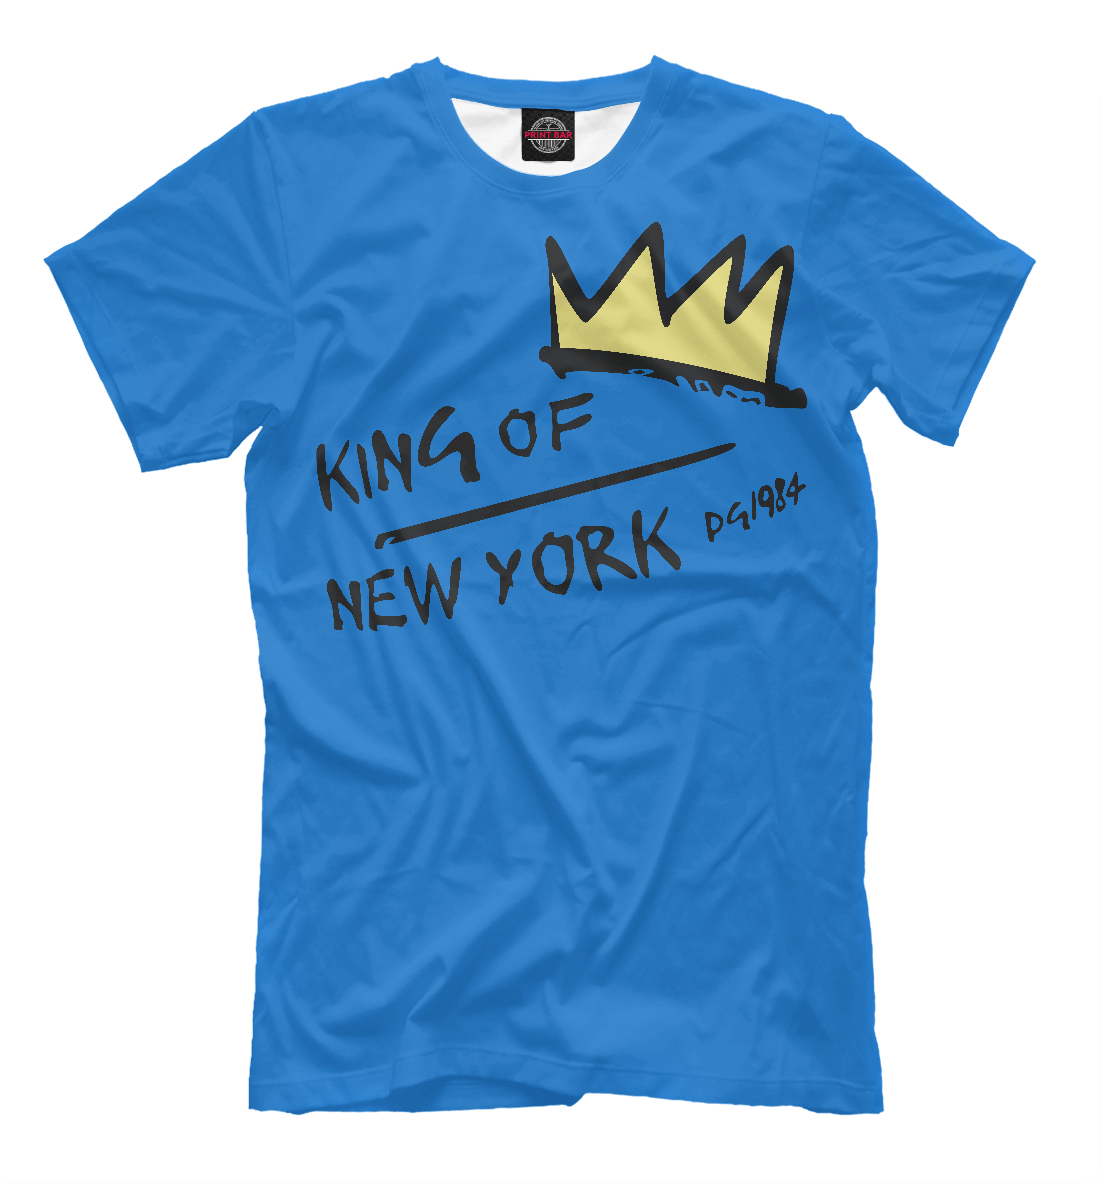 

King of New York